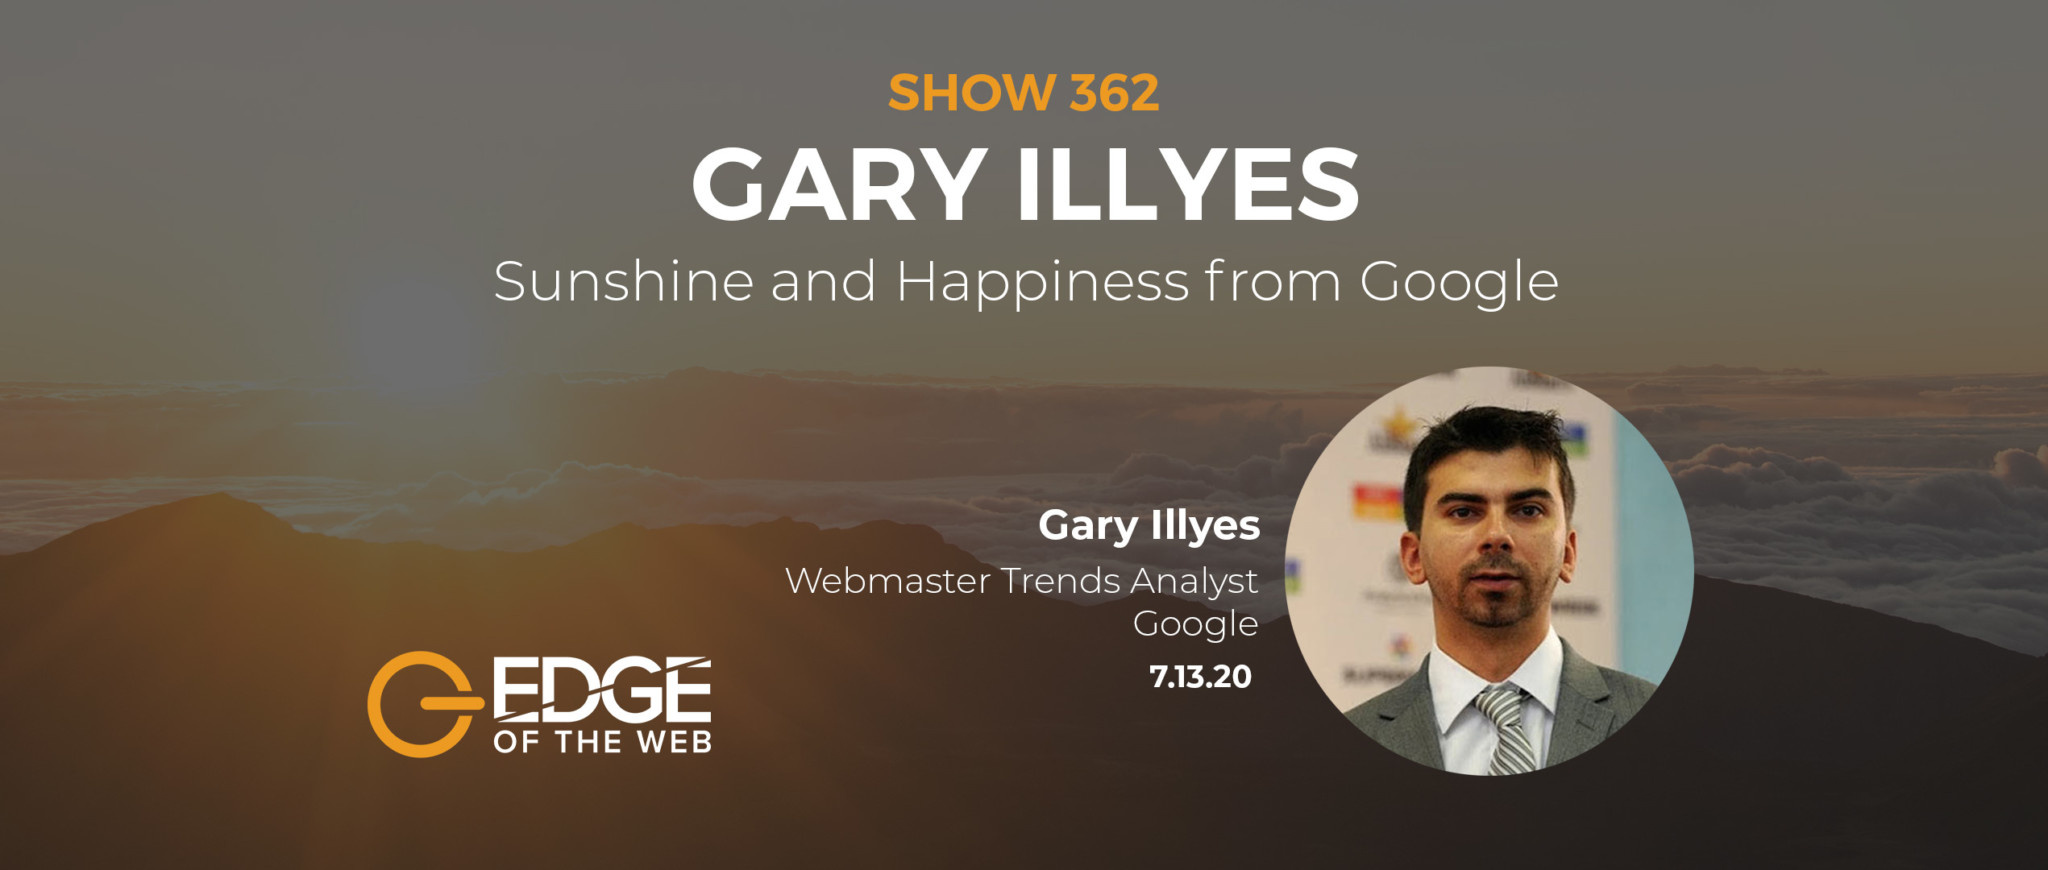 Gary Illyes EDGE EP362 Featured Image